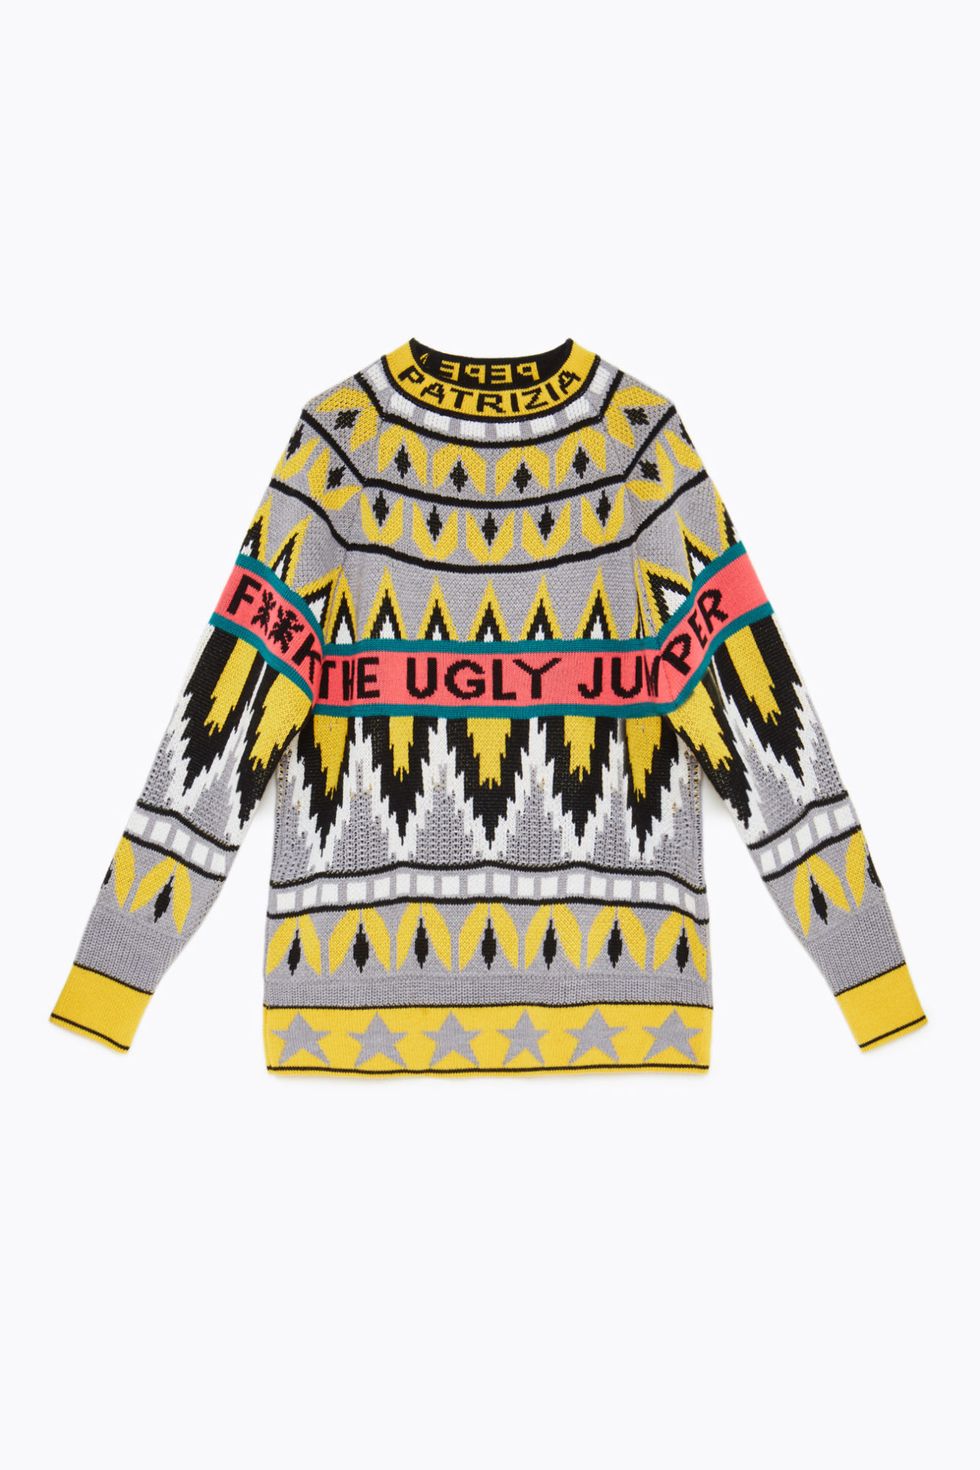 Clothing, Sleeve, Yellow, Outerwear, T-shirt, Long-sleeved t-shirt, Crop top, Top, Sweater, Neck, 